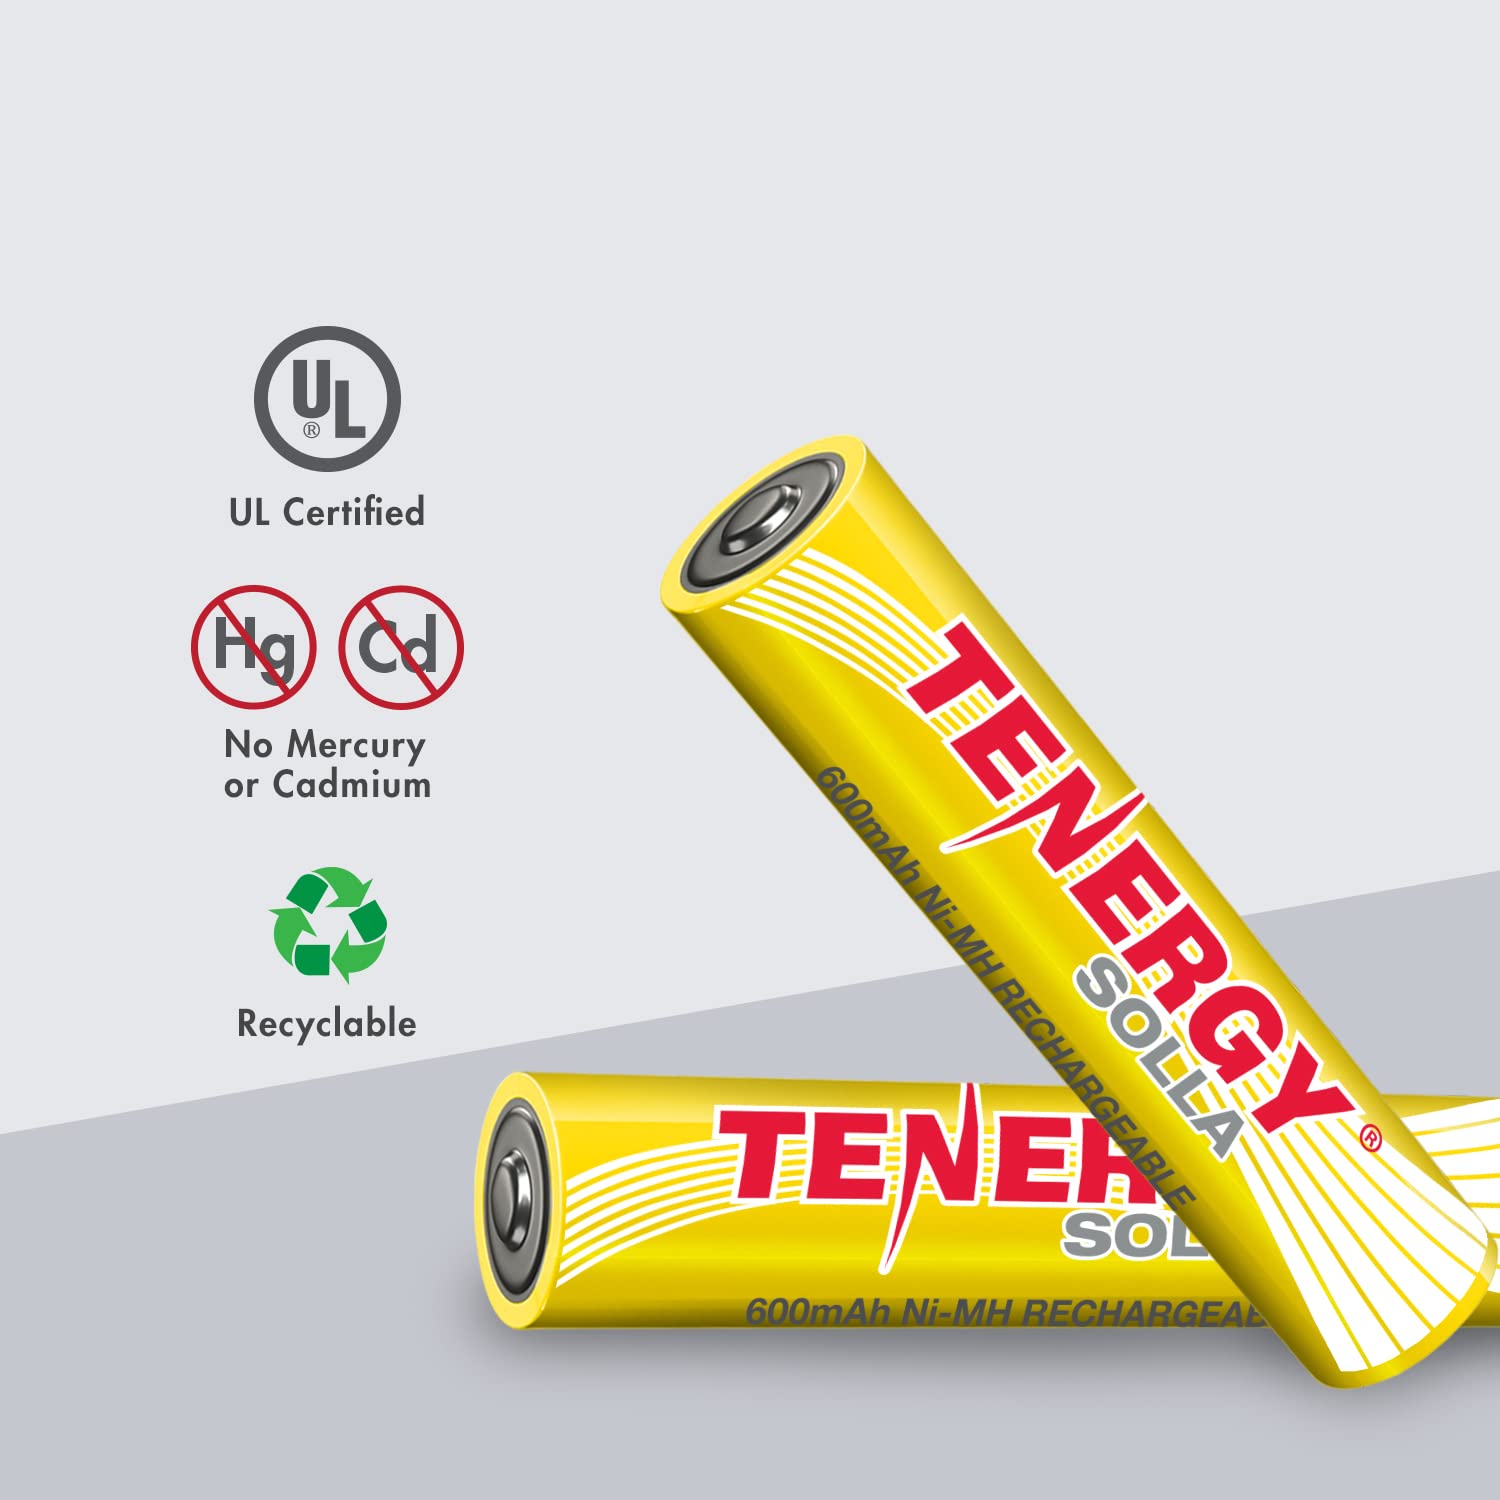 Tenergy Solla AAA Rechargeable NiMH Battery, 600mAh Solar Batteries for Outdoor Solar Lights, Outdoor Patio Lights, Anti-Leak, Outdoor Durability, 5+ Years Performance, 12 Pack, UL Certified